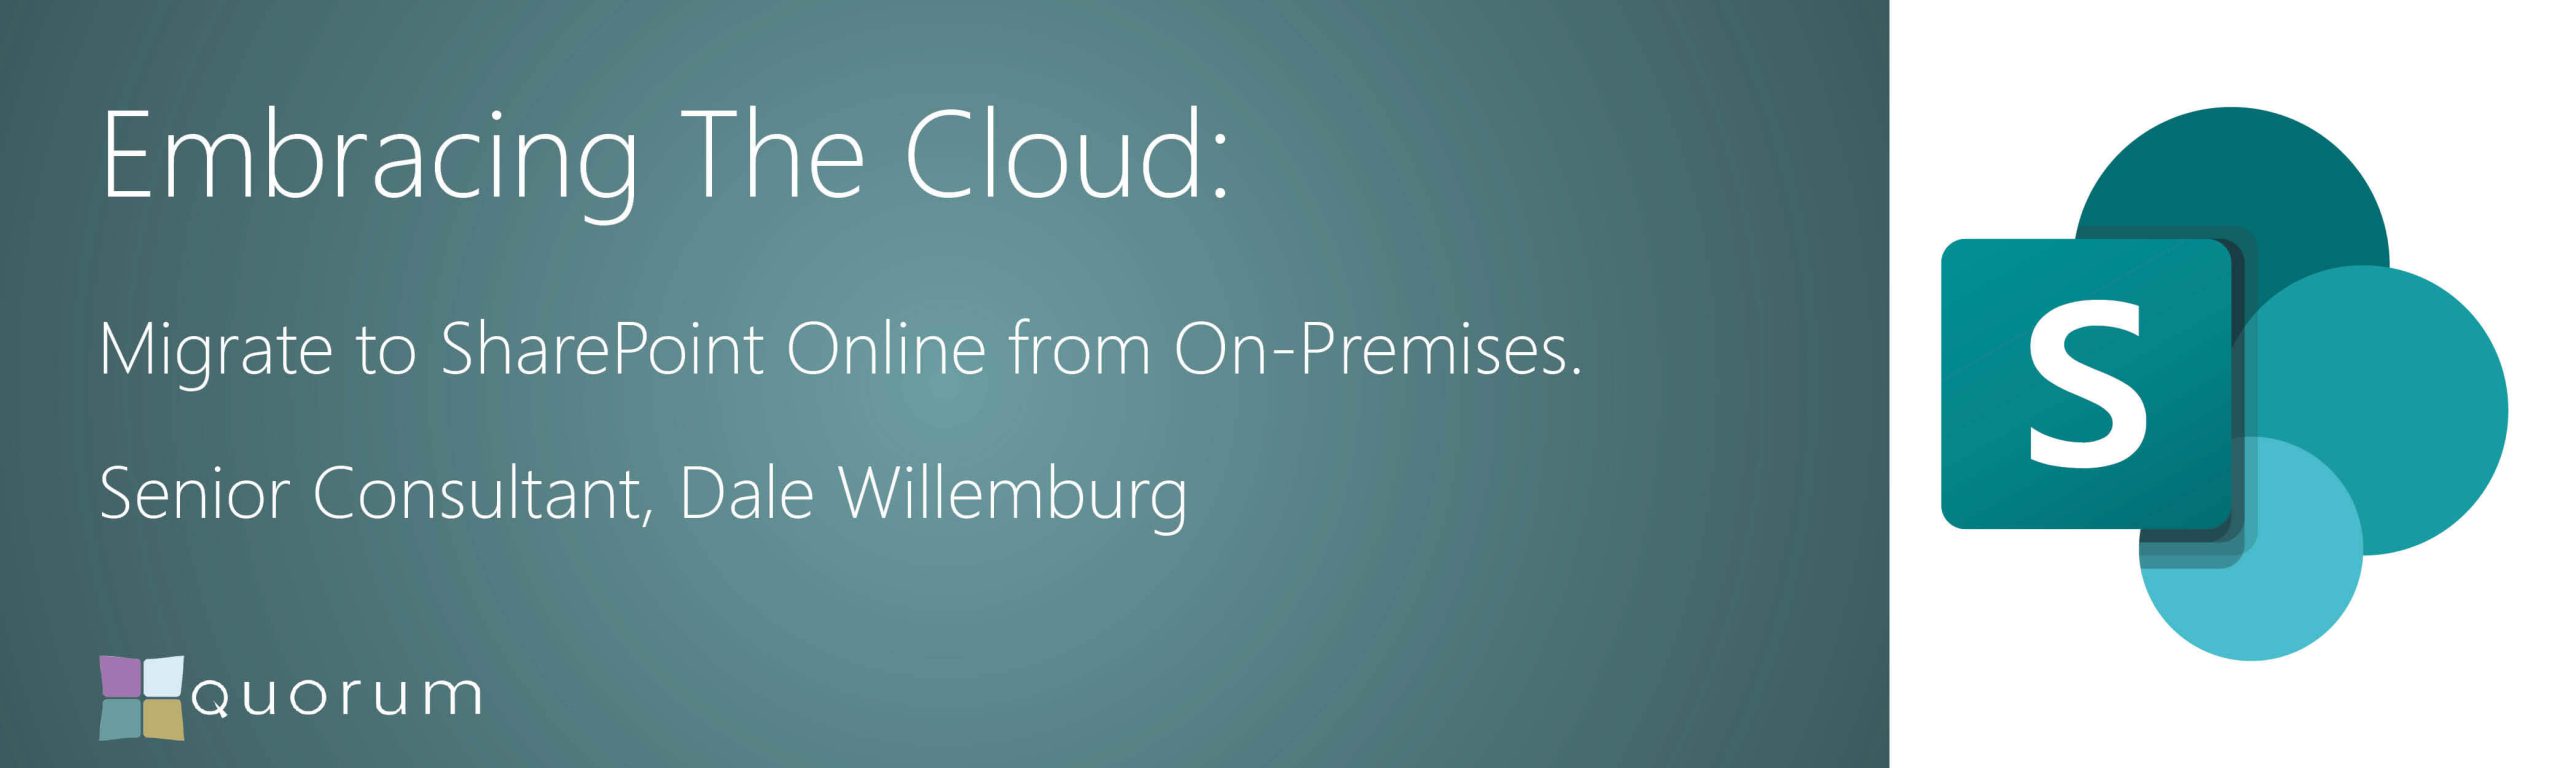 Embracing The Cloud - SharePoint Website Banner